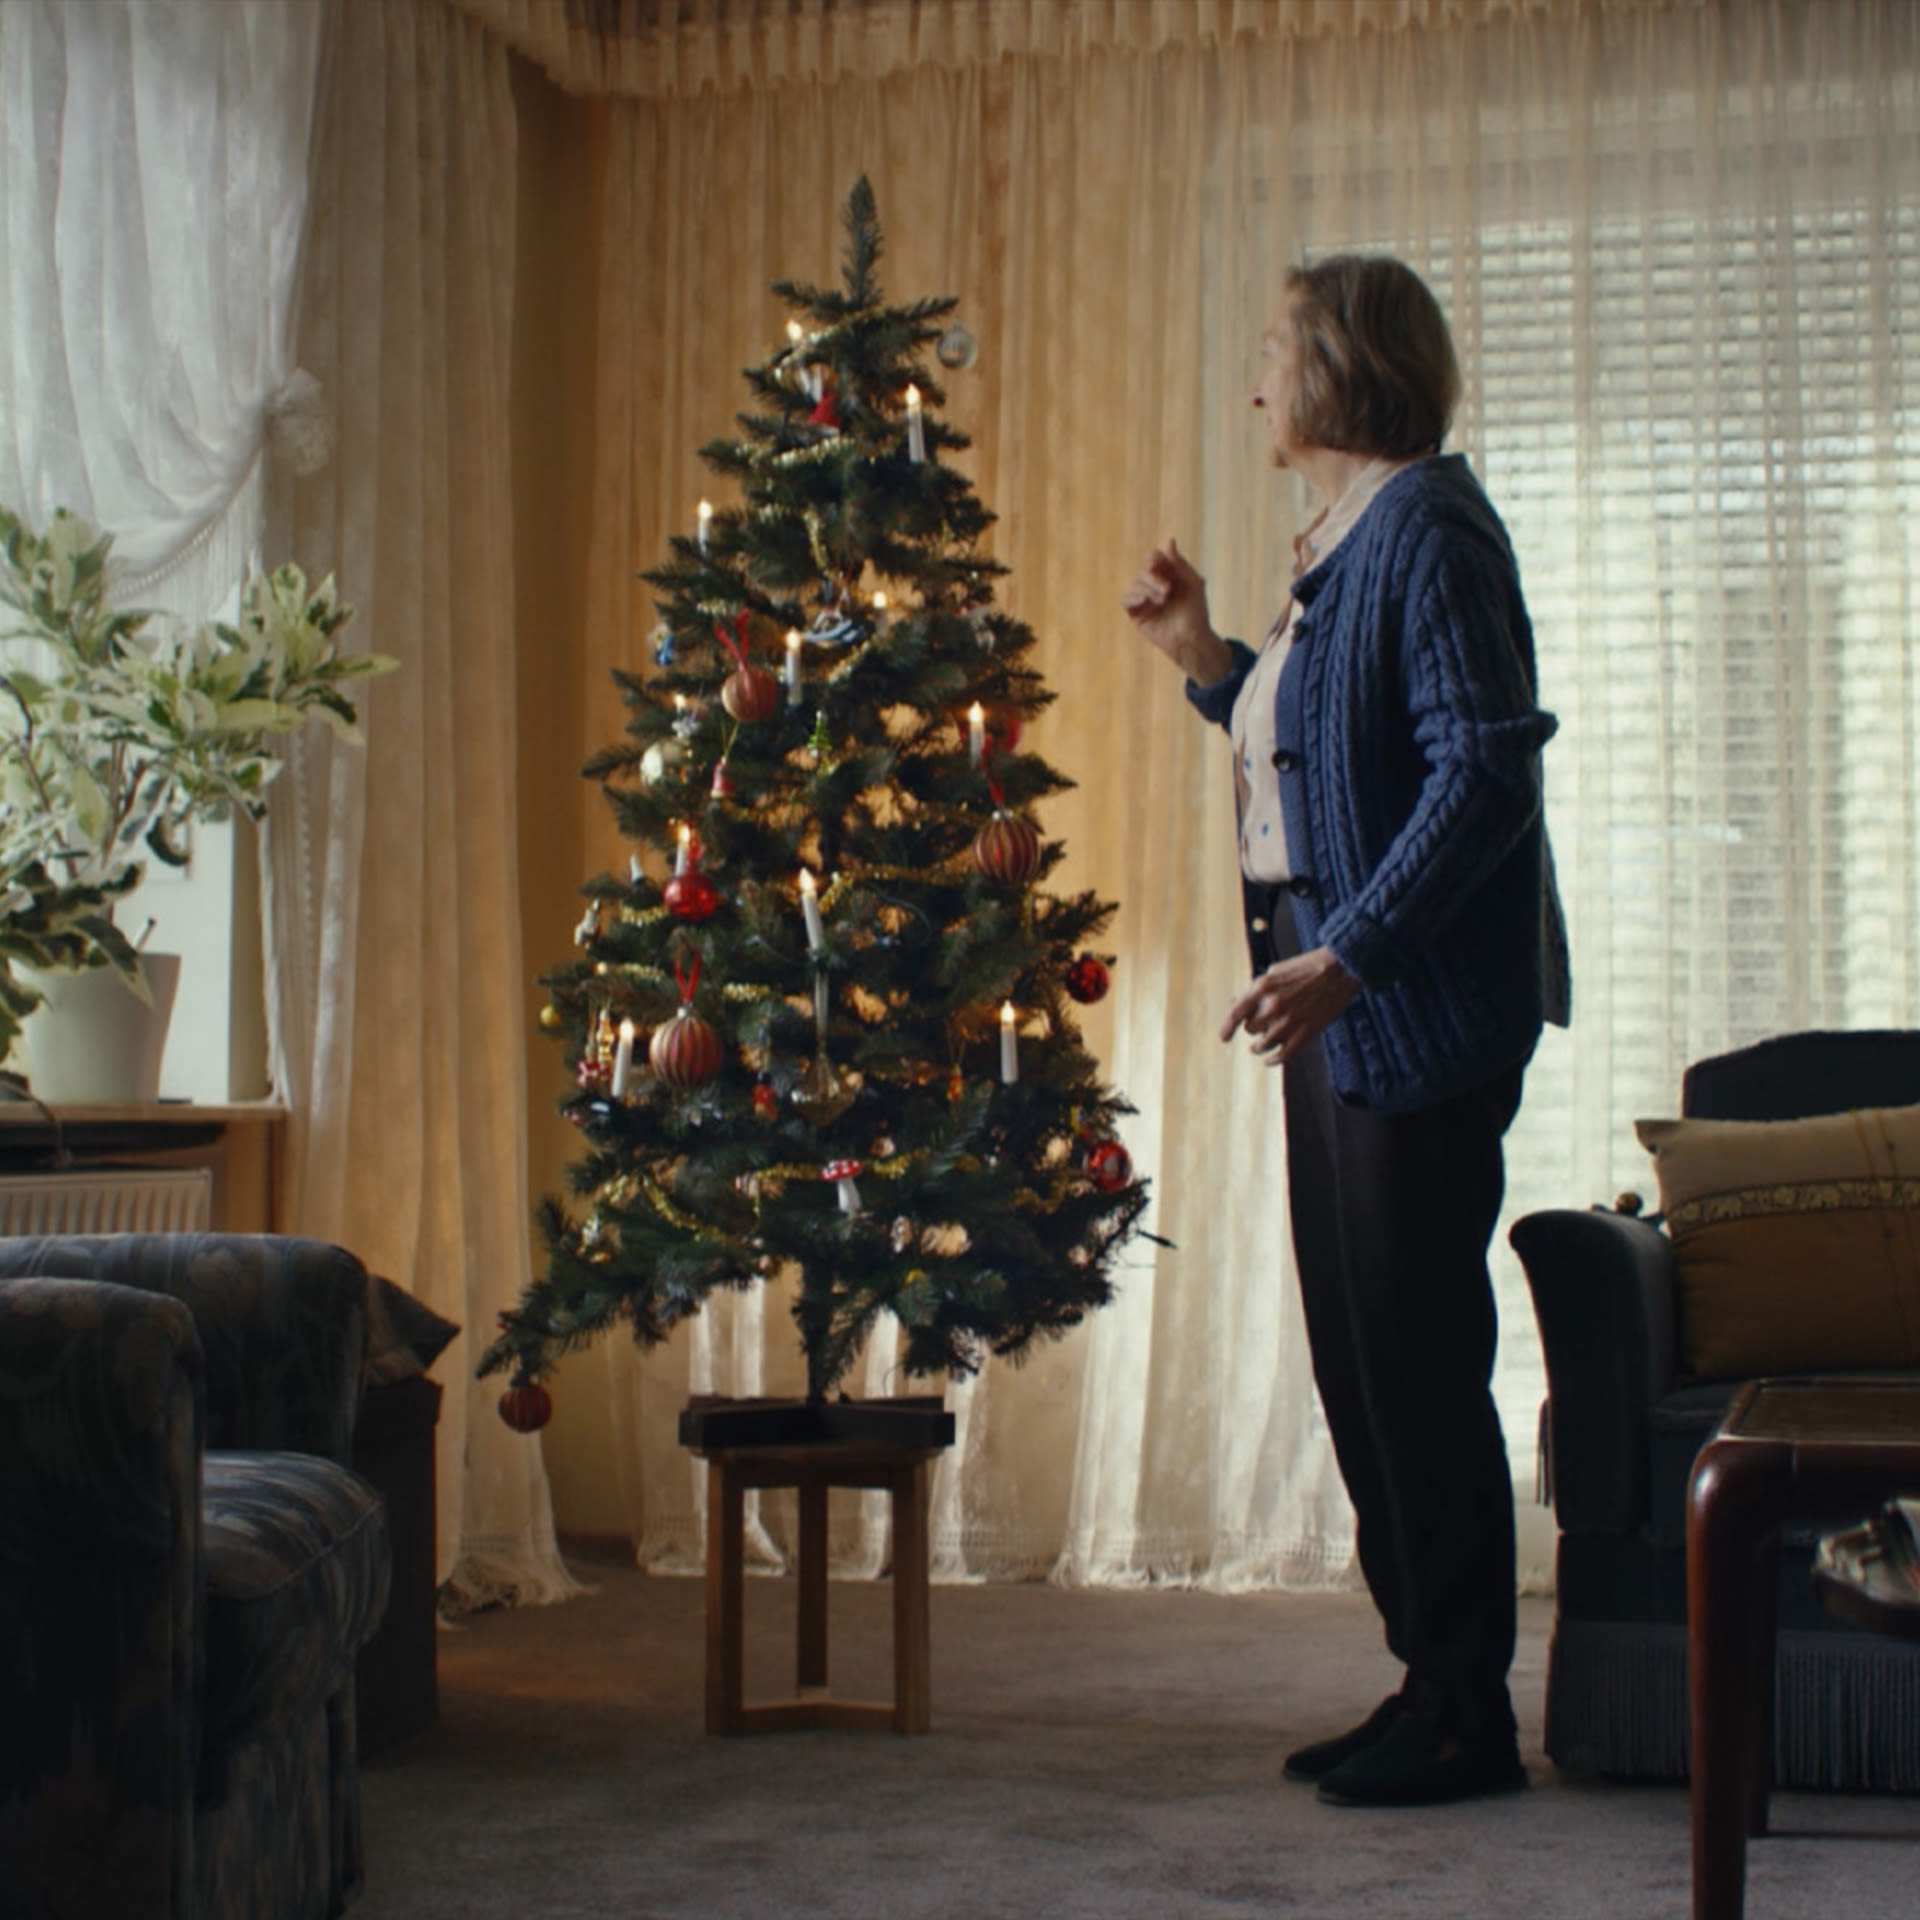 Image of Jung von Matt HAMBURG’s christmas campaign TVC for for retailer chain EDEKA thematising alzheimer's disease: older women with dementia standing in her living room in front of a small decorated Christmas tree with lighted electric candles